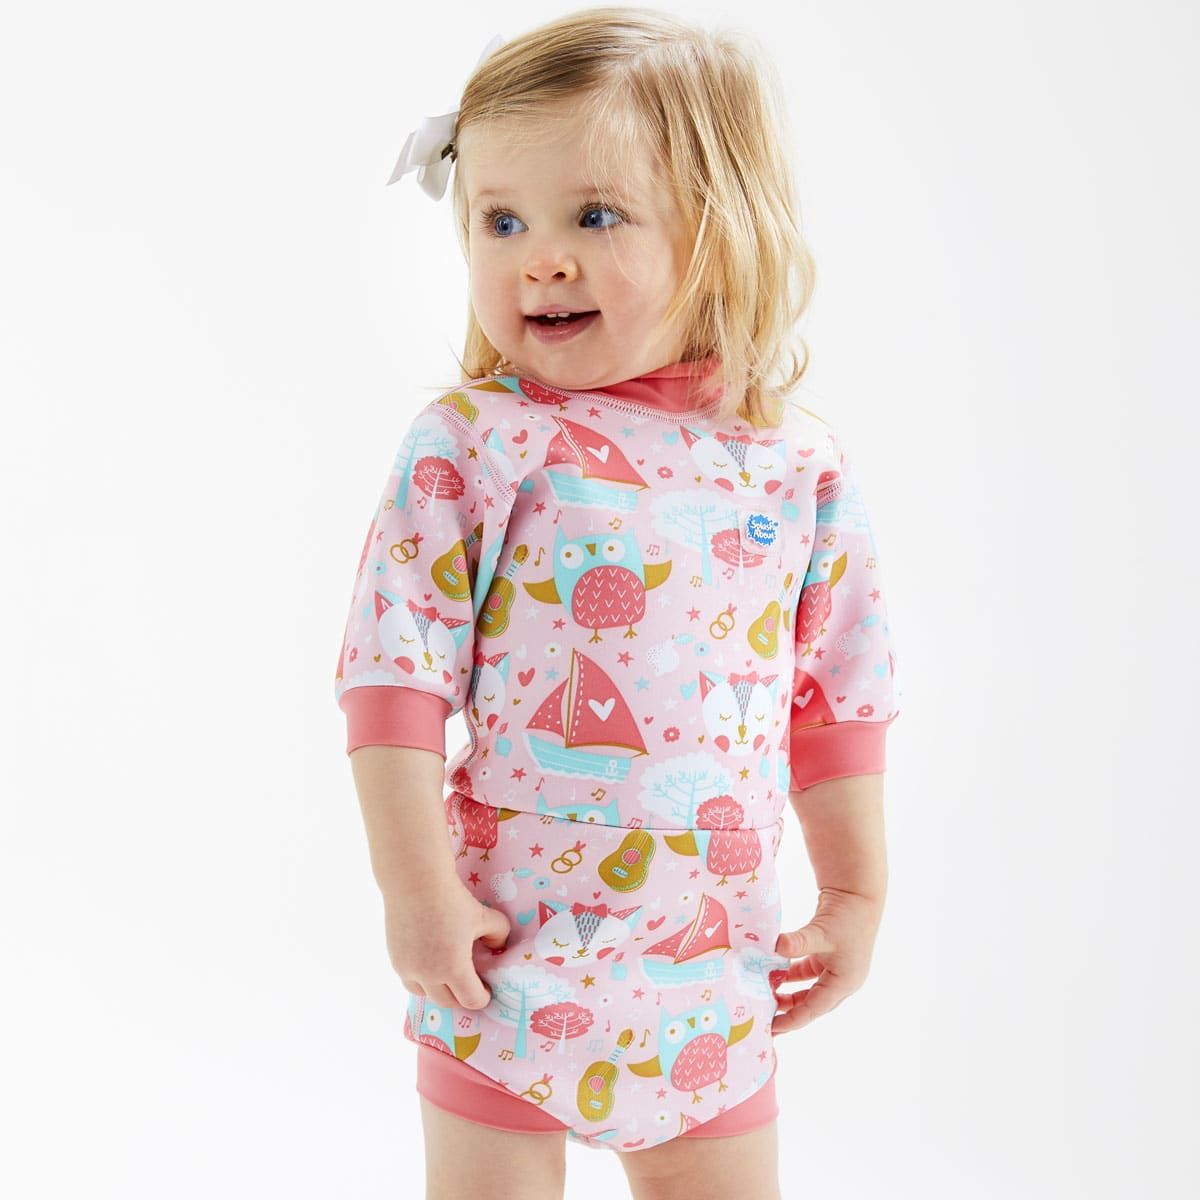 Splash About - Happy Nappy™ Wetsuit (Owl and The Pussycat) 12-24 months (Size: XL)